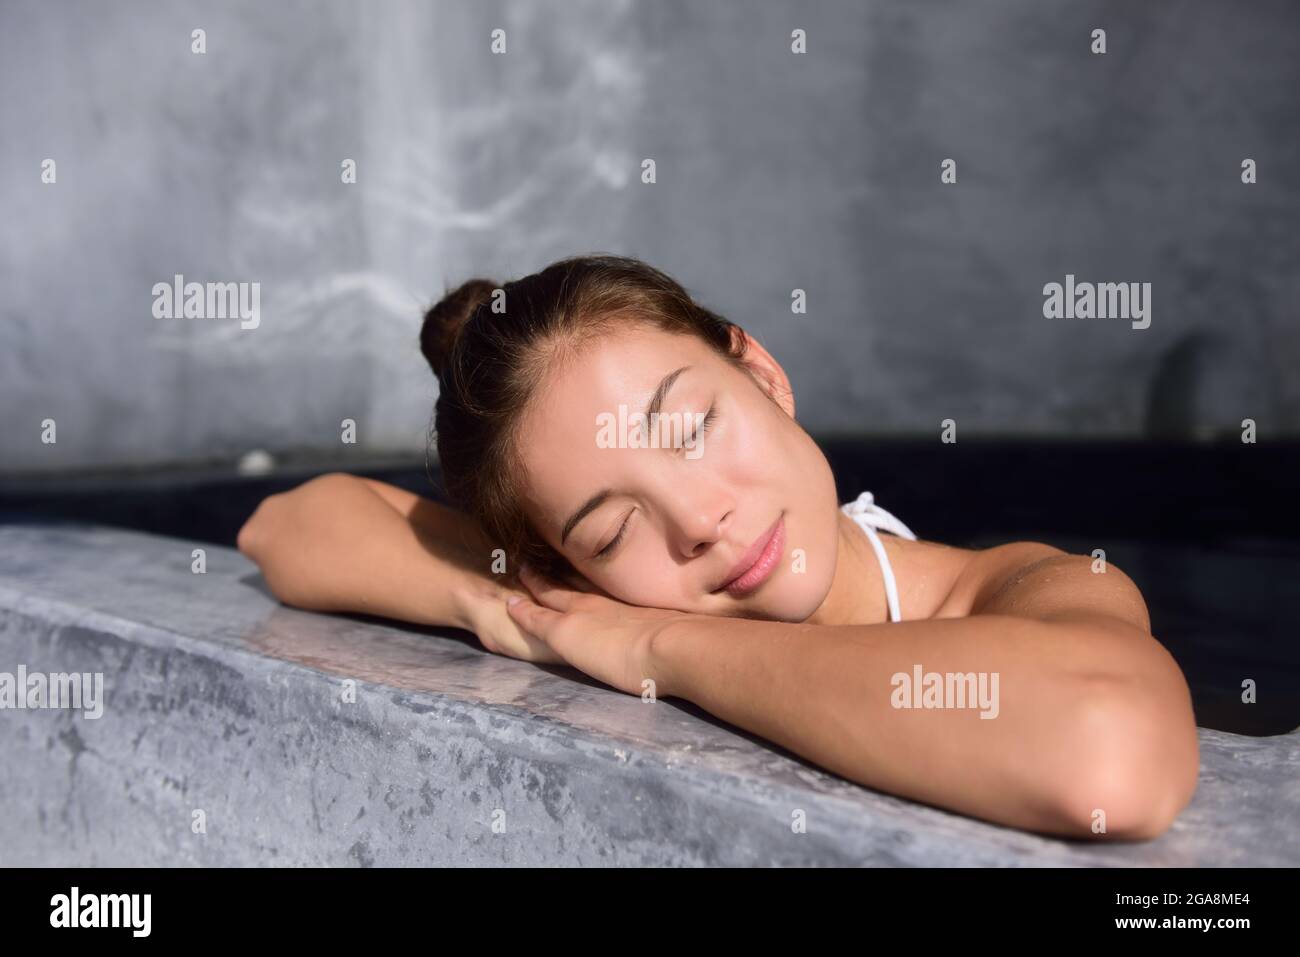 Beautiful Woman Relaxing In Jacuzzi Hot Tub At Spa Stock Photo